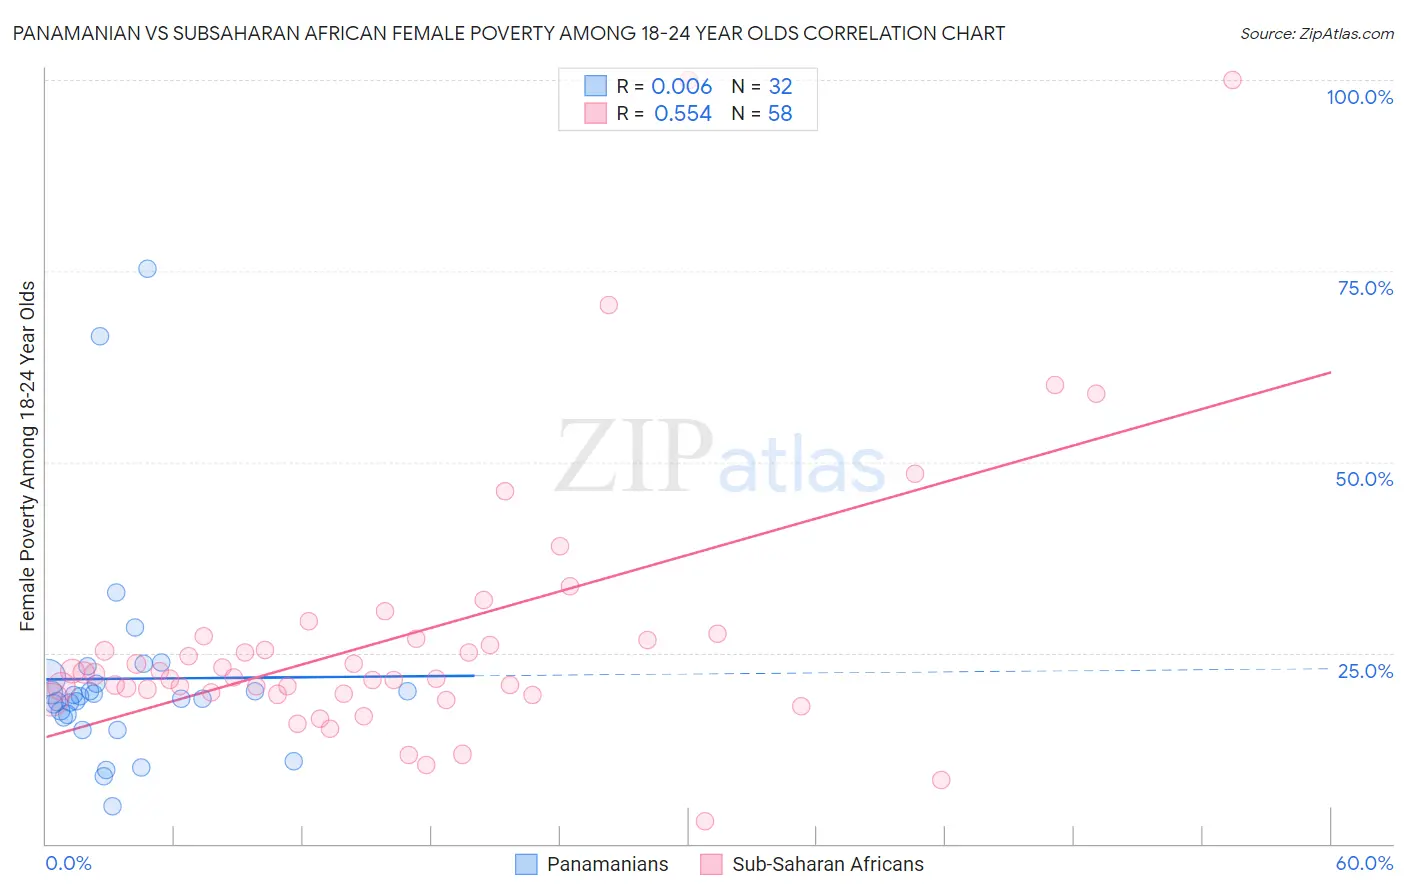 Panamanian vs Subsaharan African Female Poverty Among 18-24 Year Olds